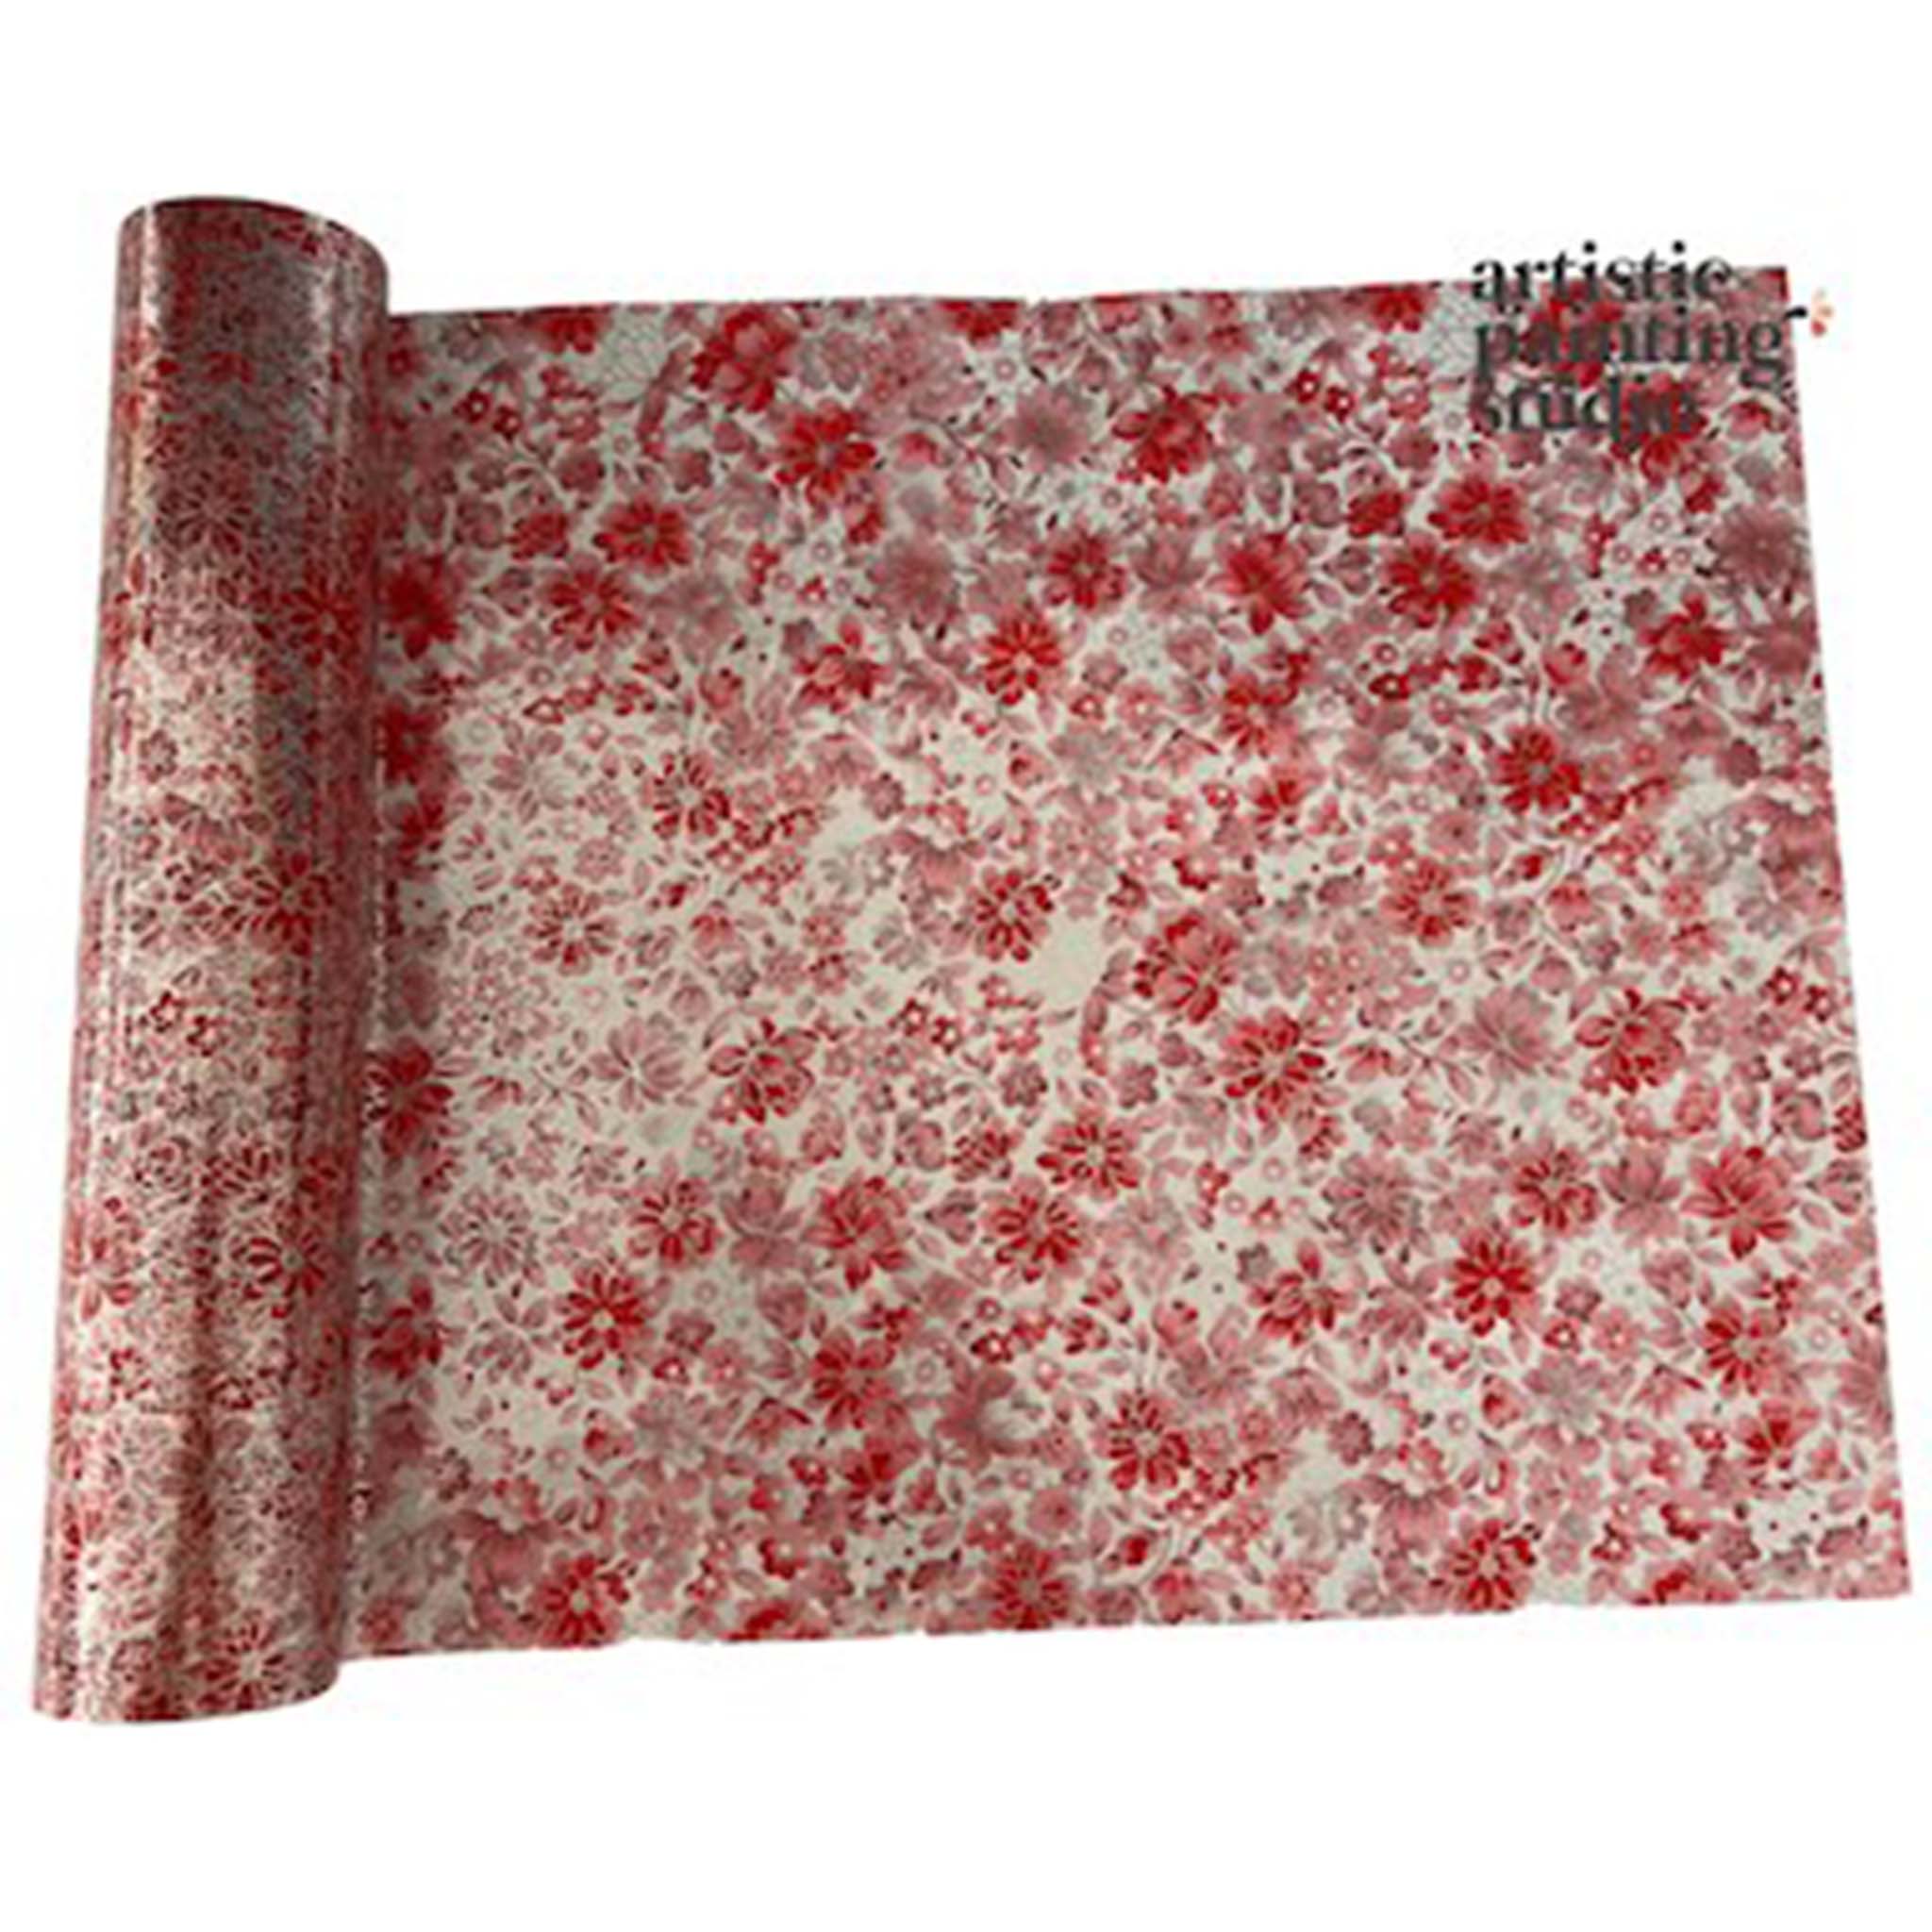 A roll of a transparent metallic transfer foil that features red and pink flower blooms is against a white background.